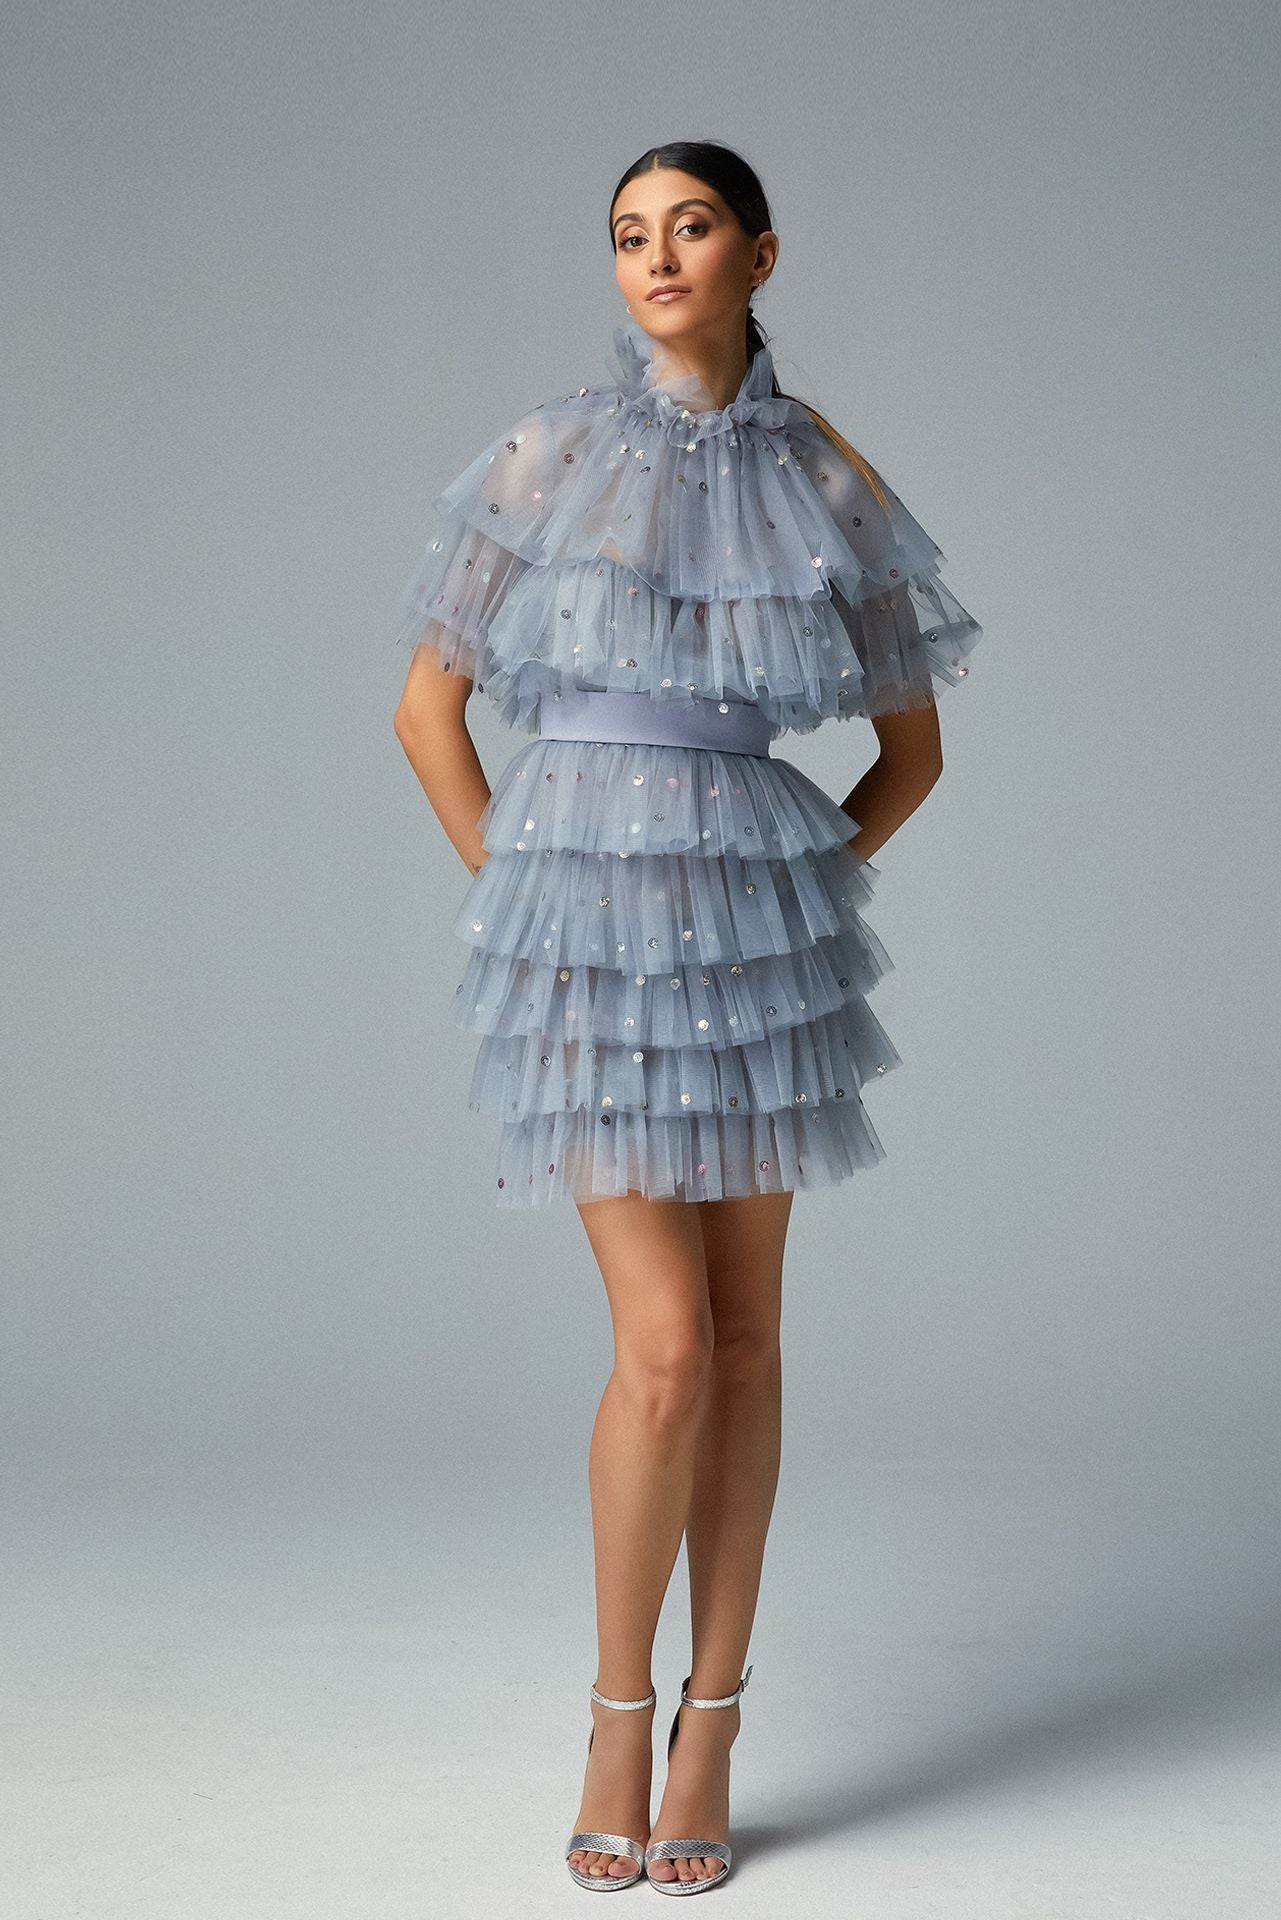 Sequined Silver Dots, a Multi Layered Ruffled Powder Blue Tulle